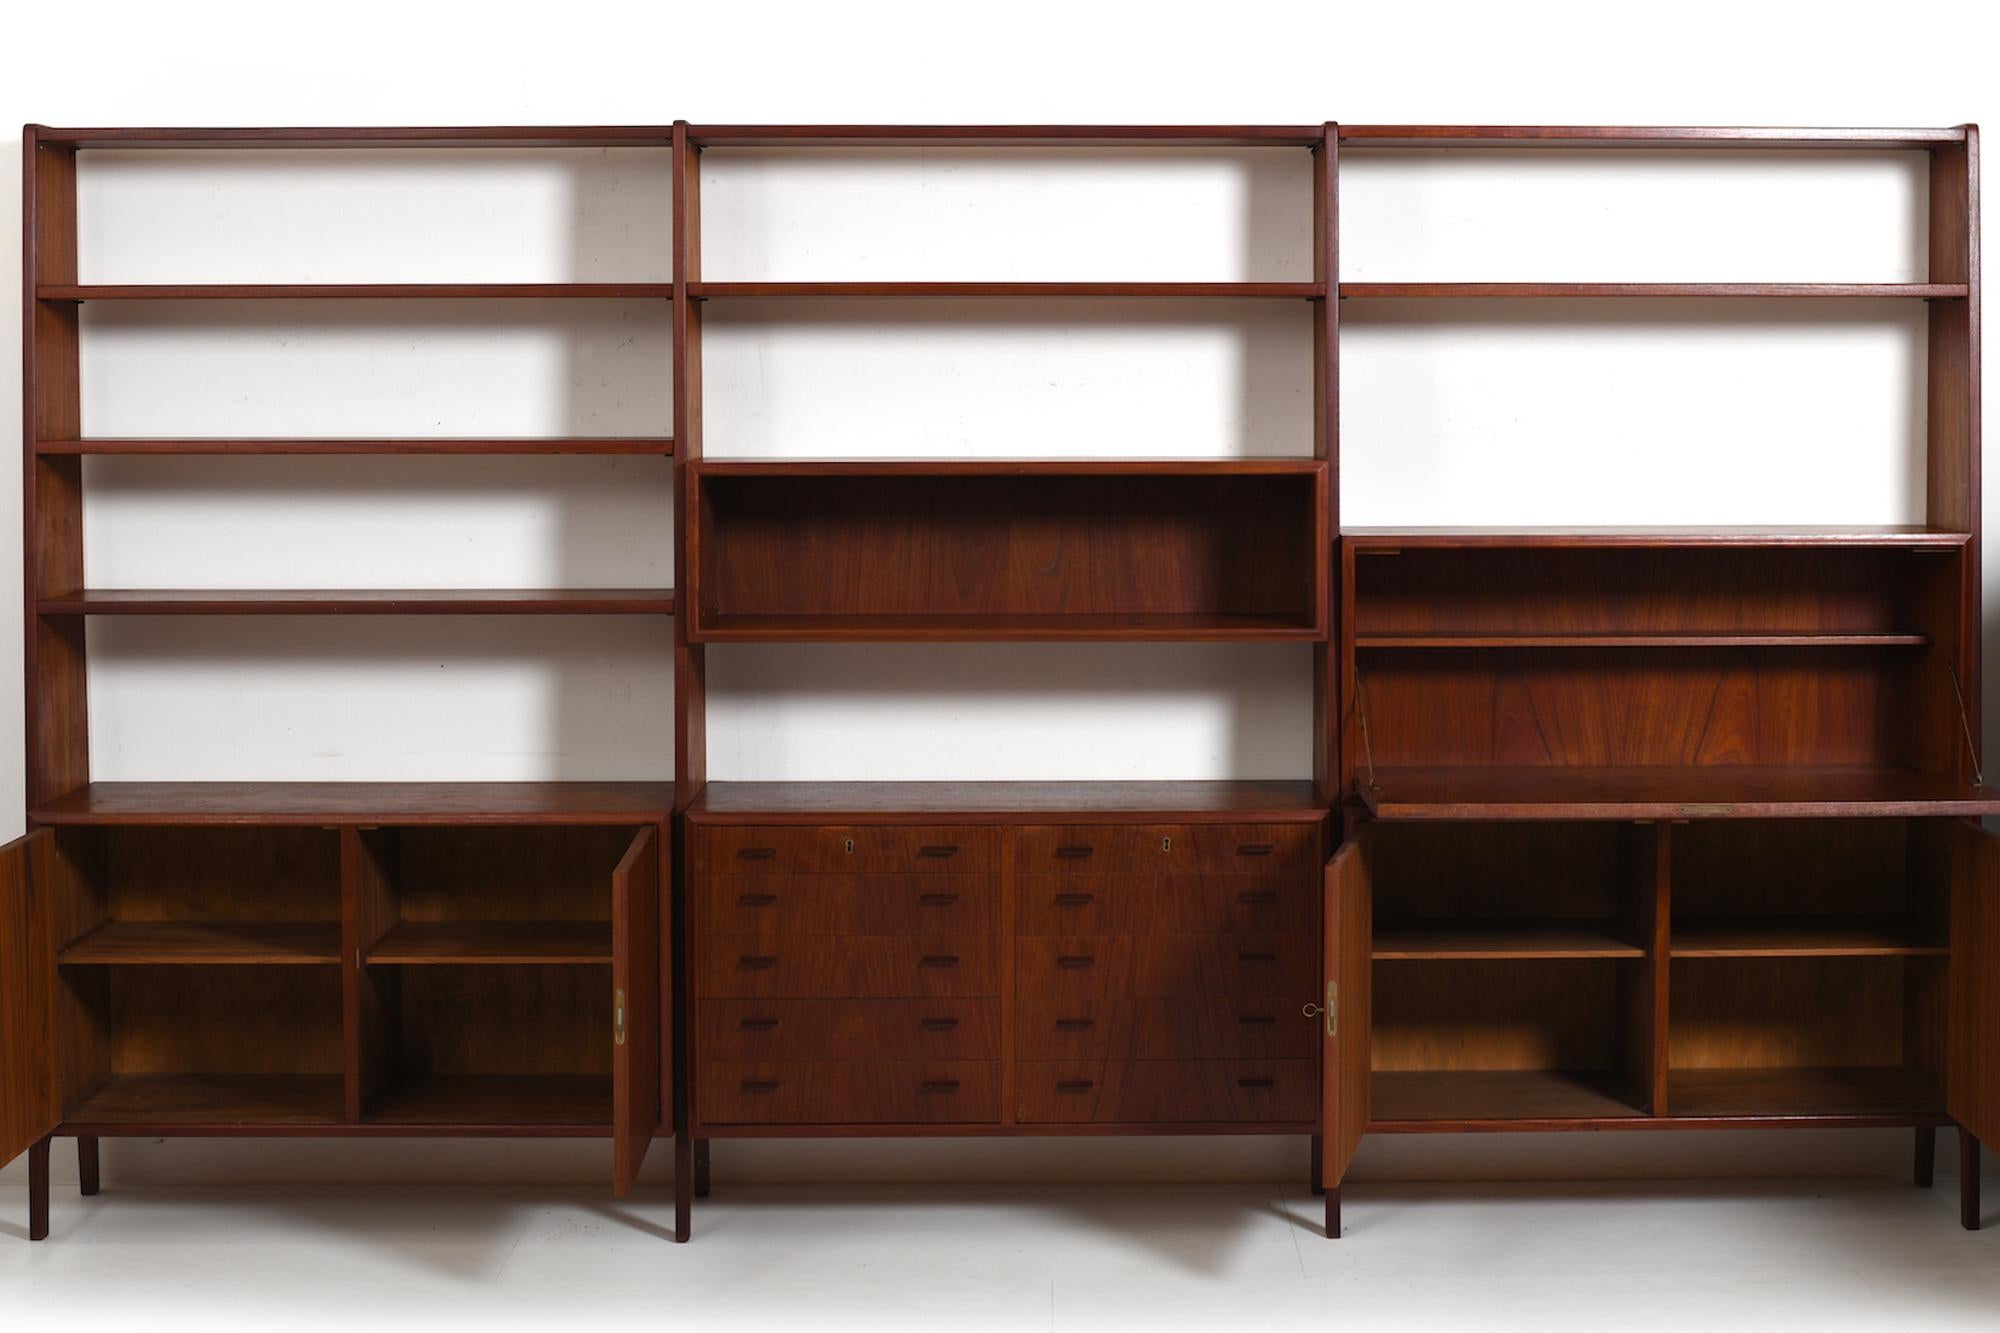 20th Century Danish Freestanding Teak Shelf System 1950s with Cabinets For Sale